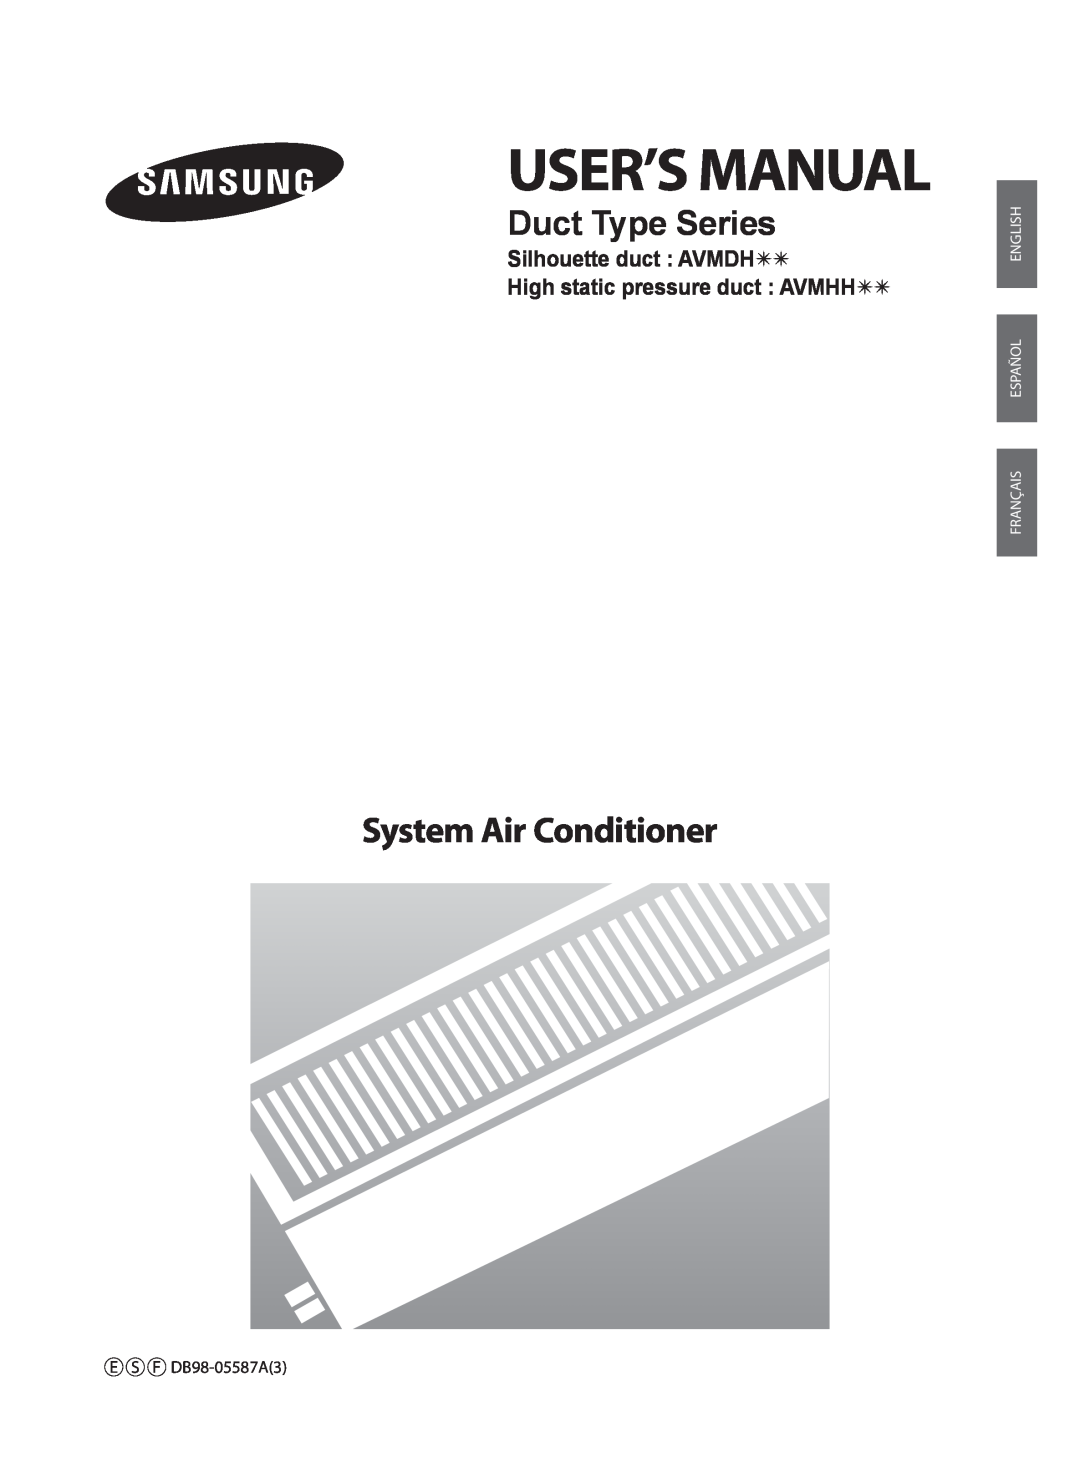 Samsung user manual Duct Type Series, Silhouette duct AVMDH, High static pressure duct AVMHH 